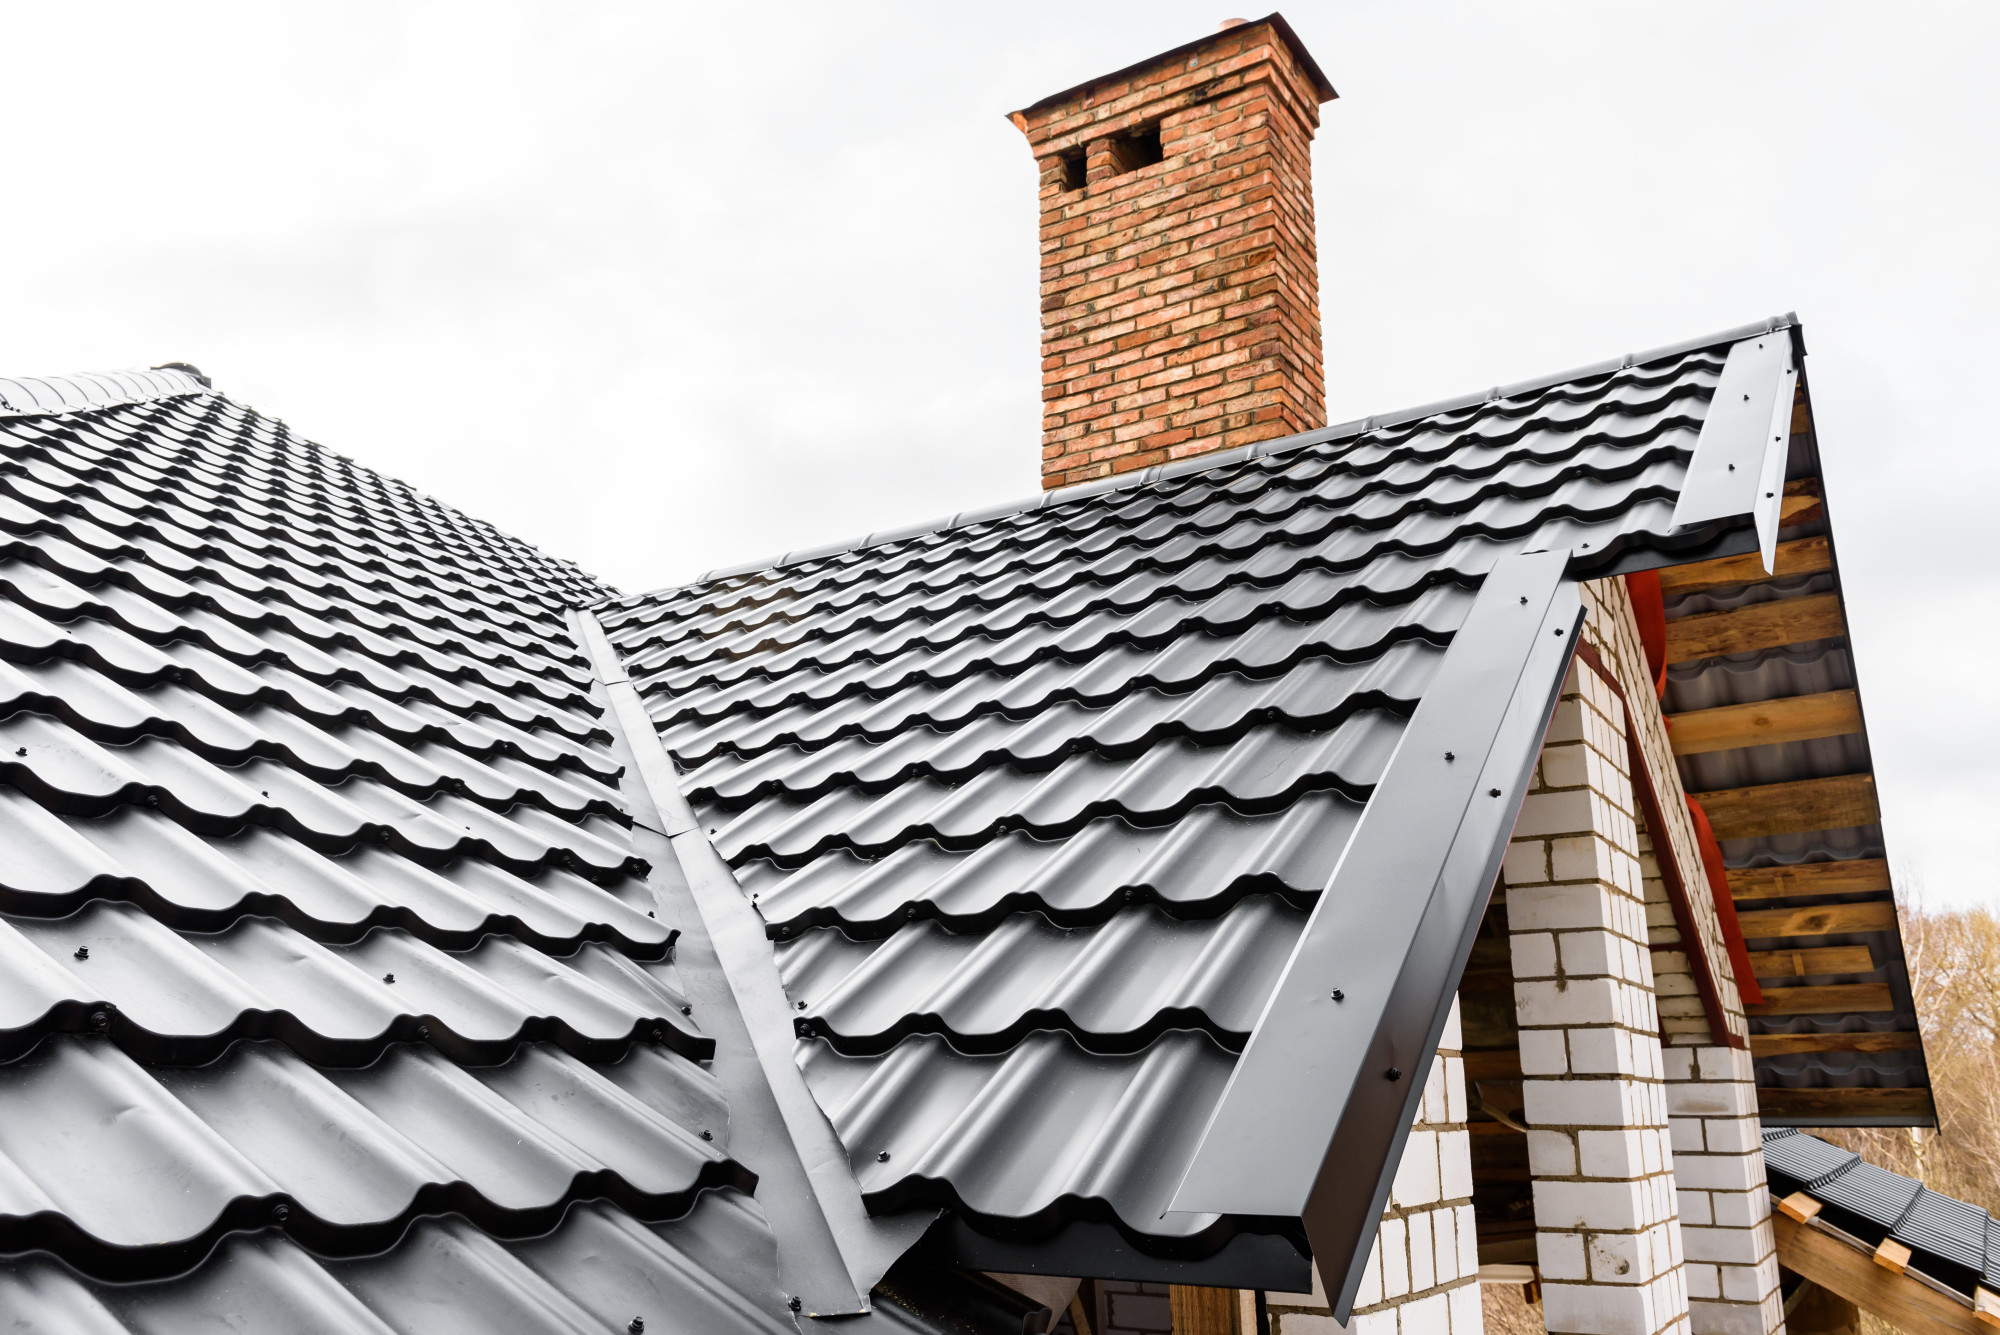 If you are on the hunt for the best roof materials, then look no further than metal. Here are a few major benefits of metal roofing.